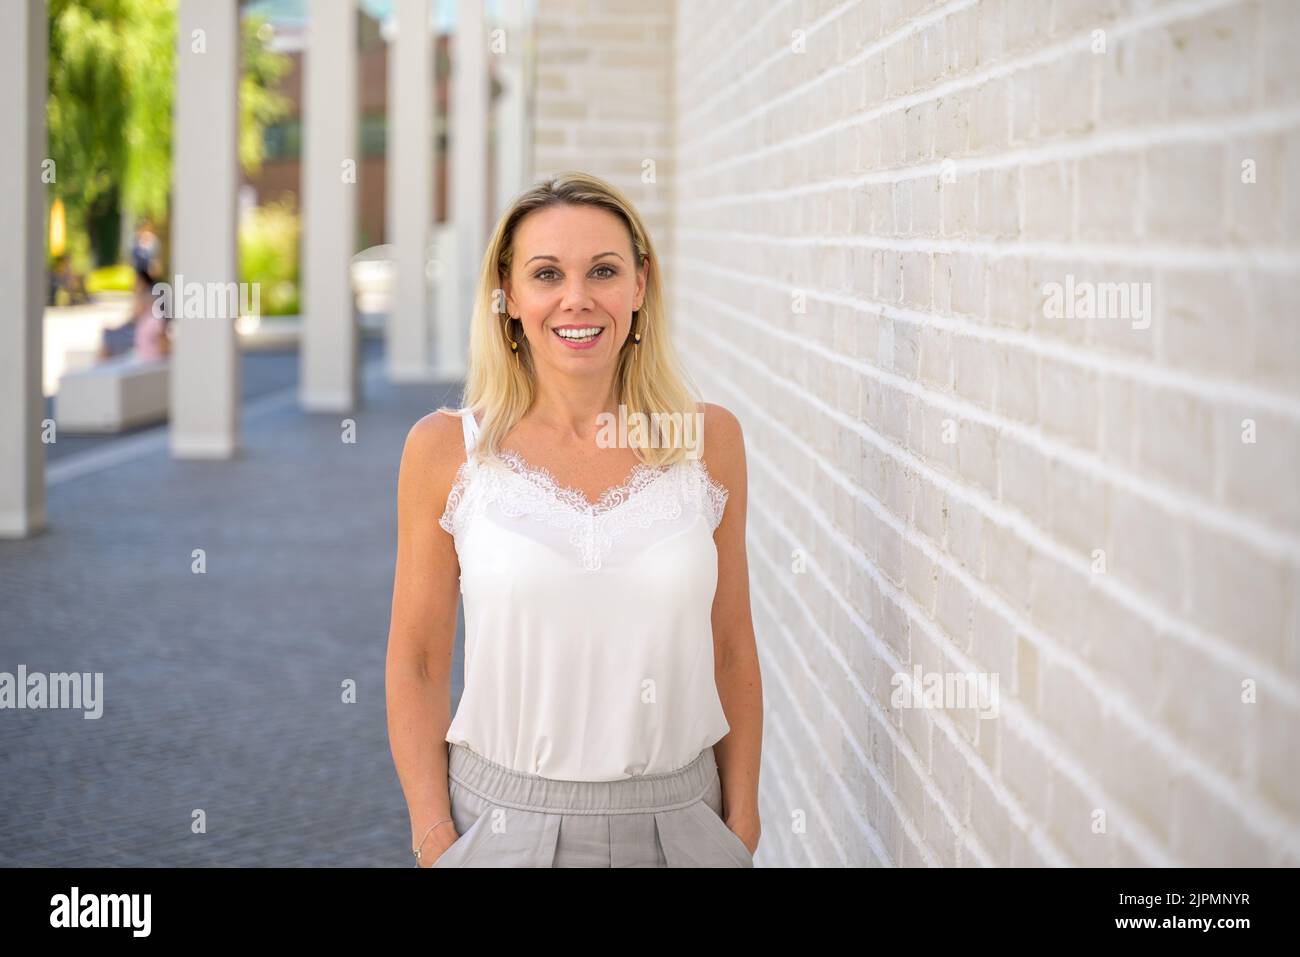 Relaxed friendly blond woman standing under a portico giving the camera a beaming smile Stock Photo